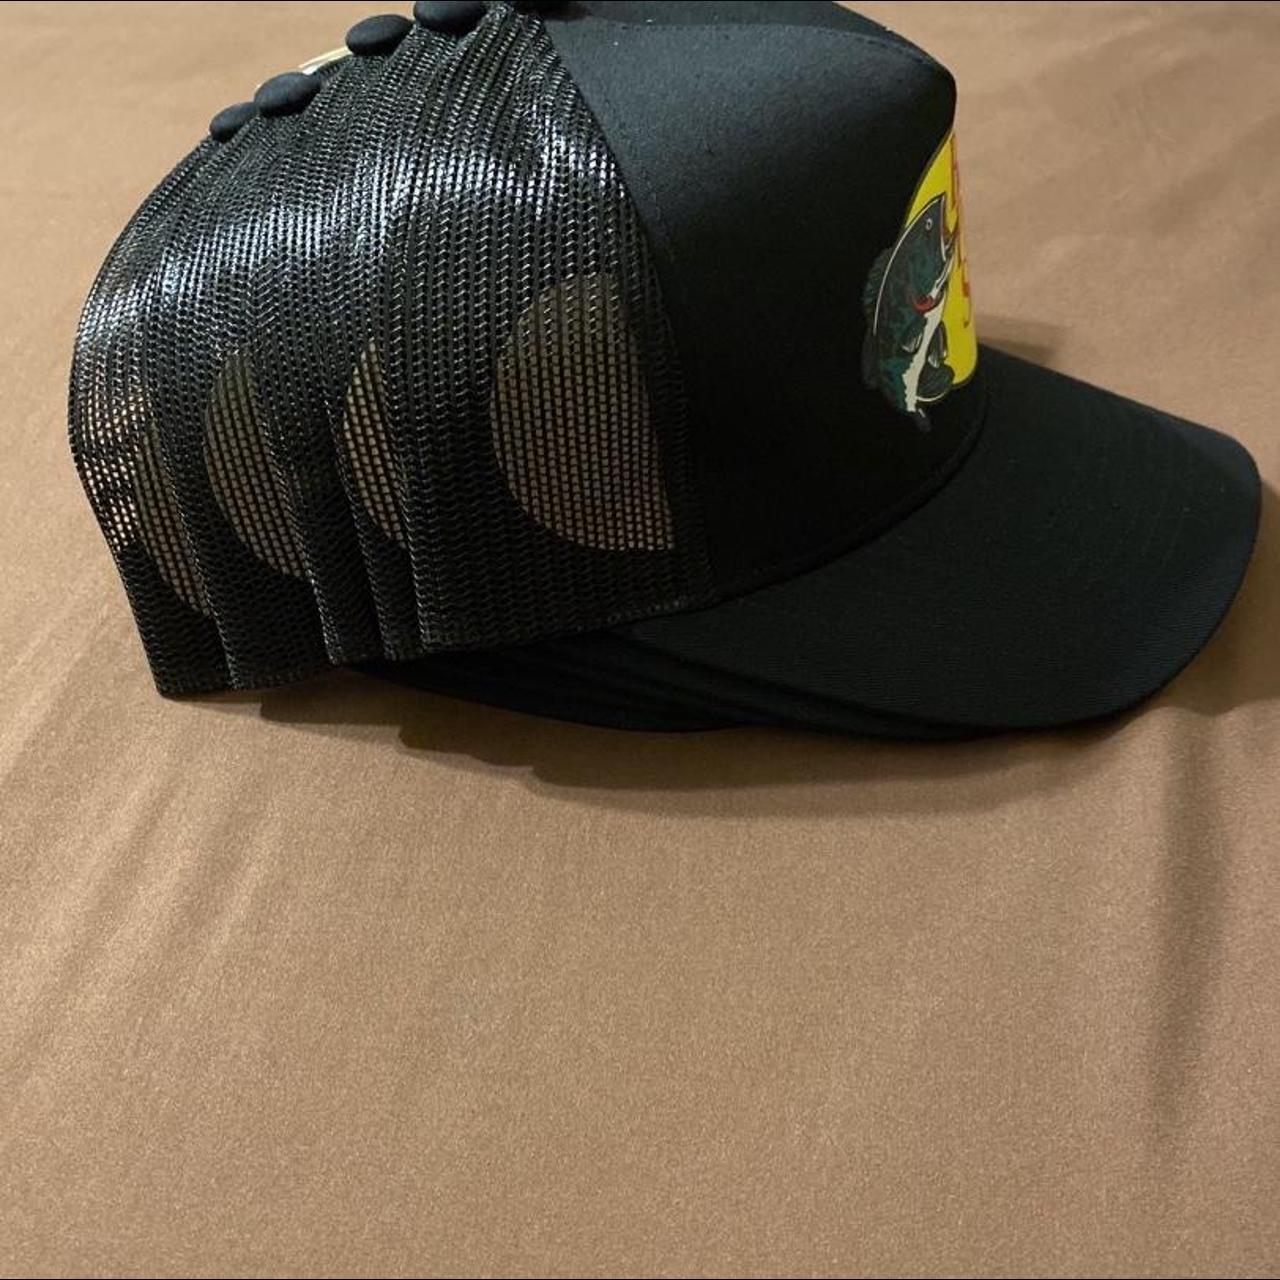 New Black Bass Pro Shops Hats with